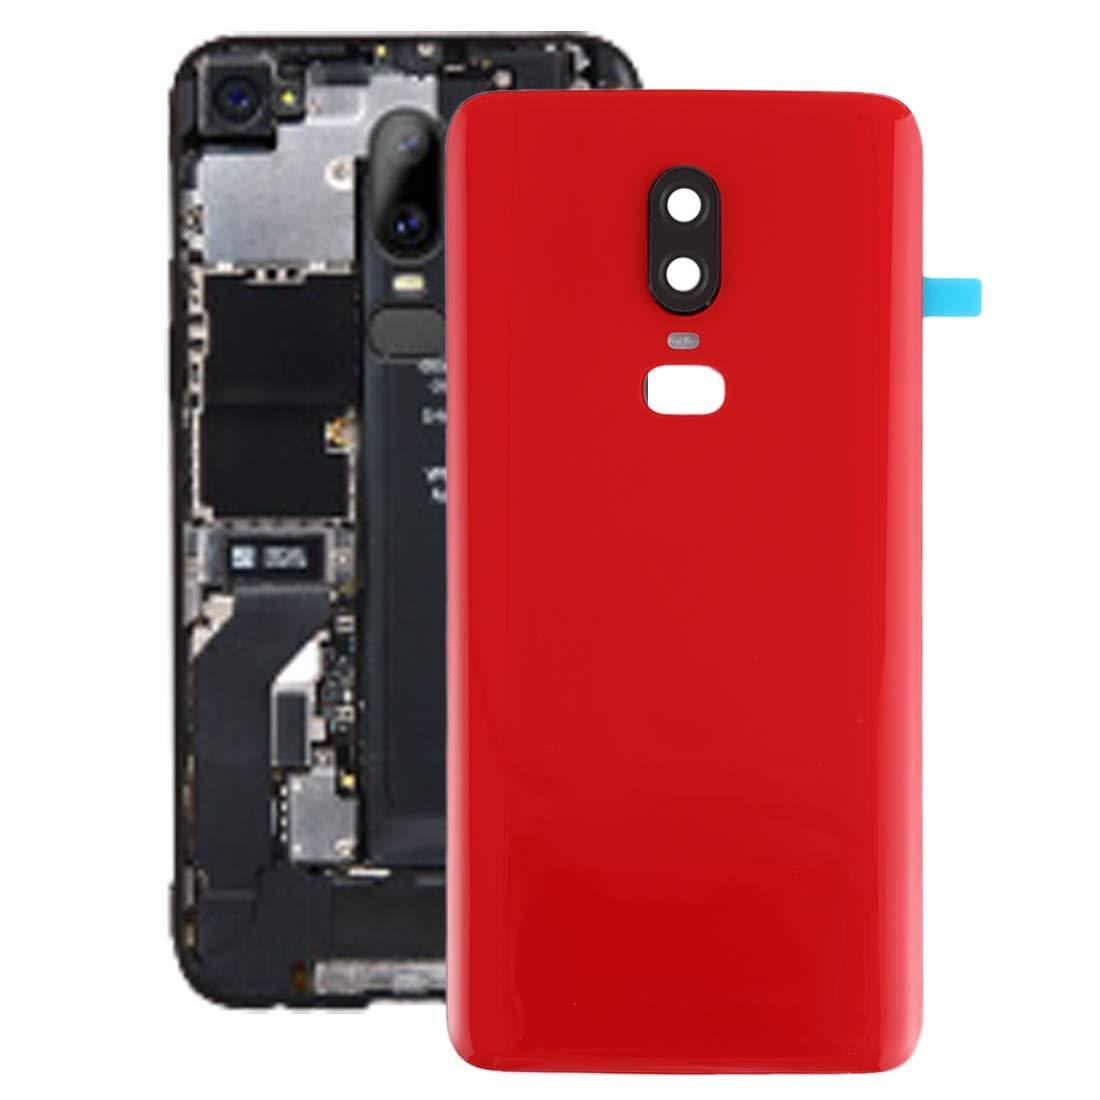 Back Glass Panel for Oneplus 6 Red